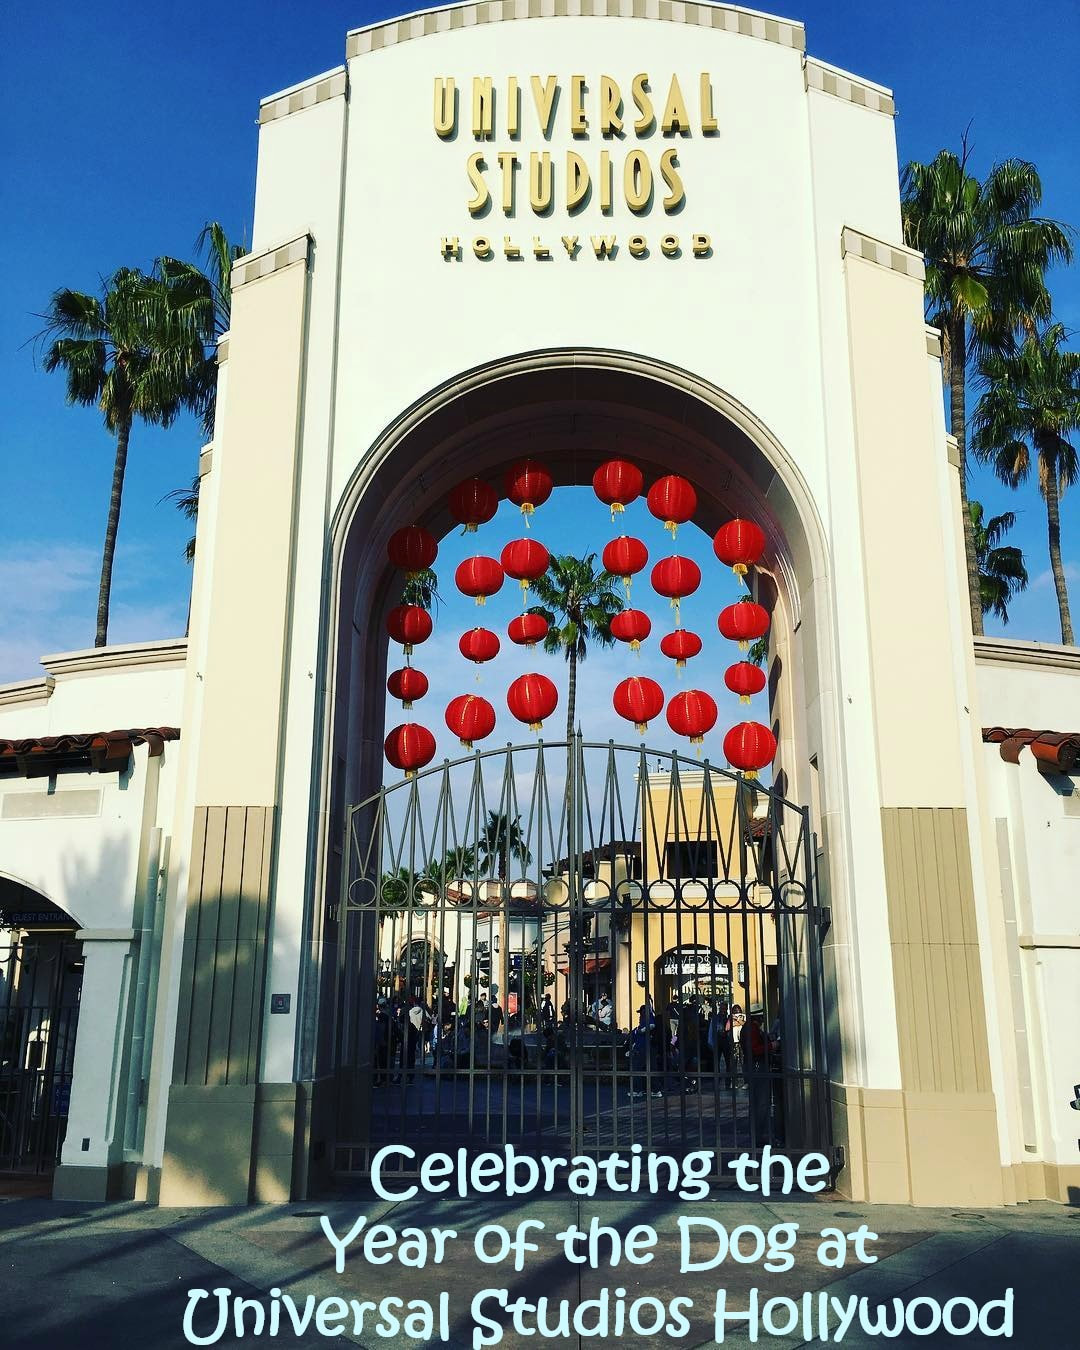 Celebrating the Year of the Dog at Universal Studios Hollywood